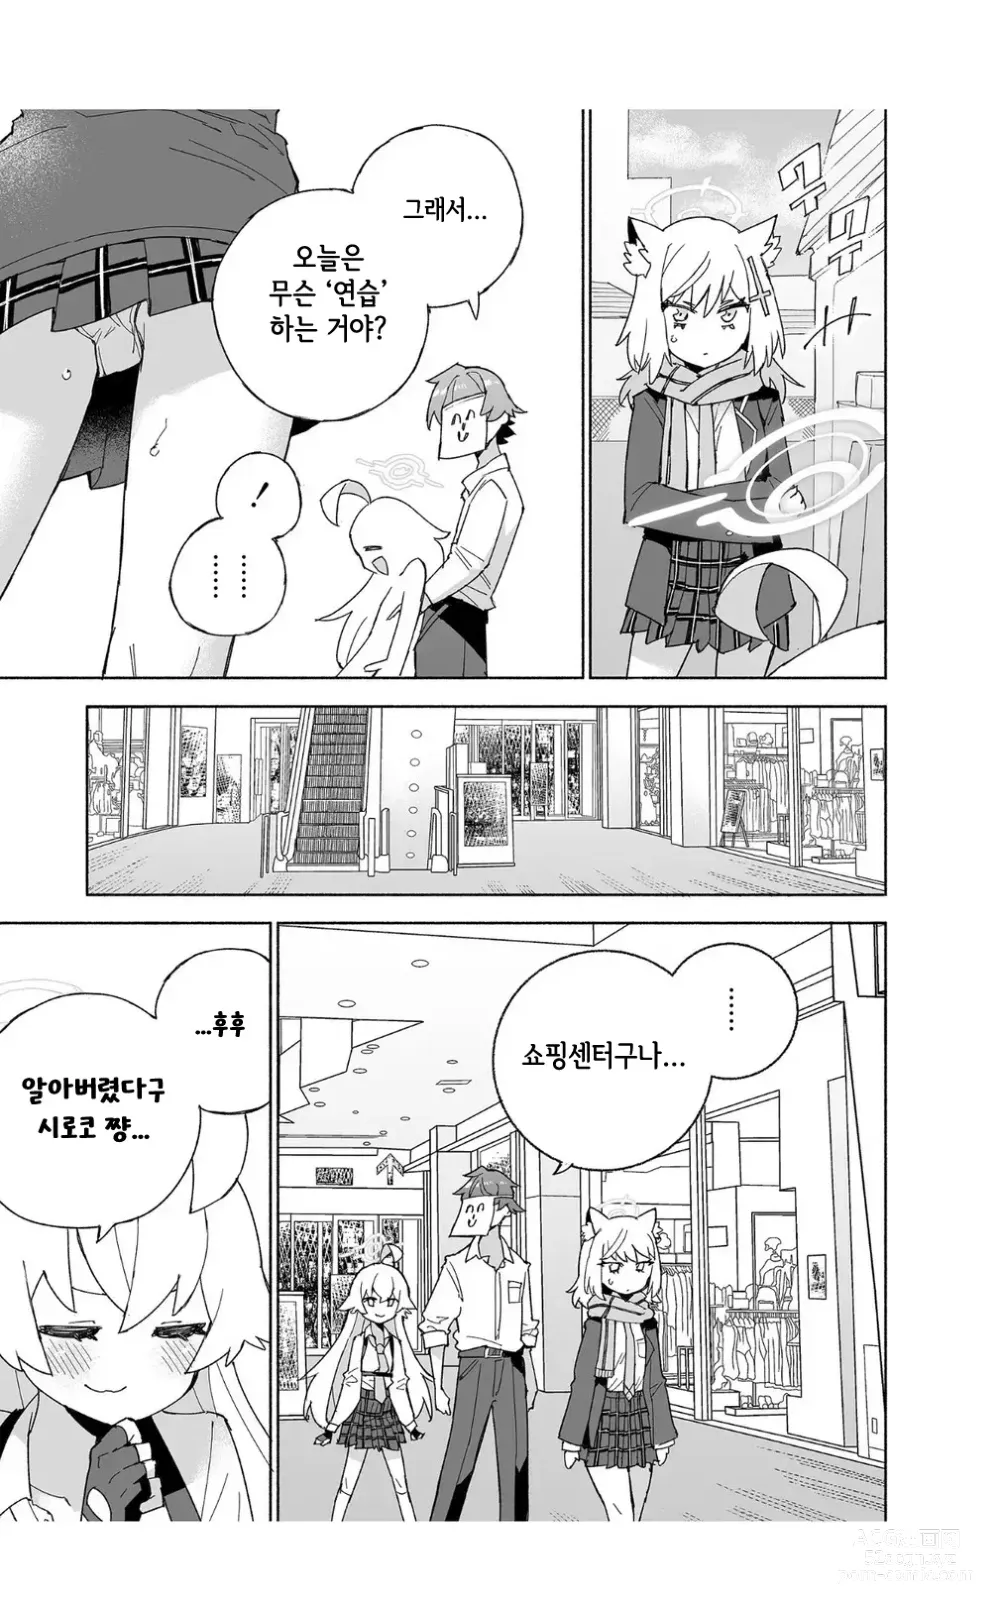 Page 8 of doujinshi 늑대의 물